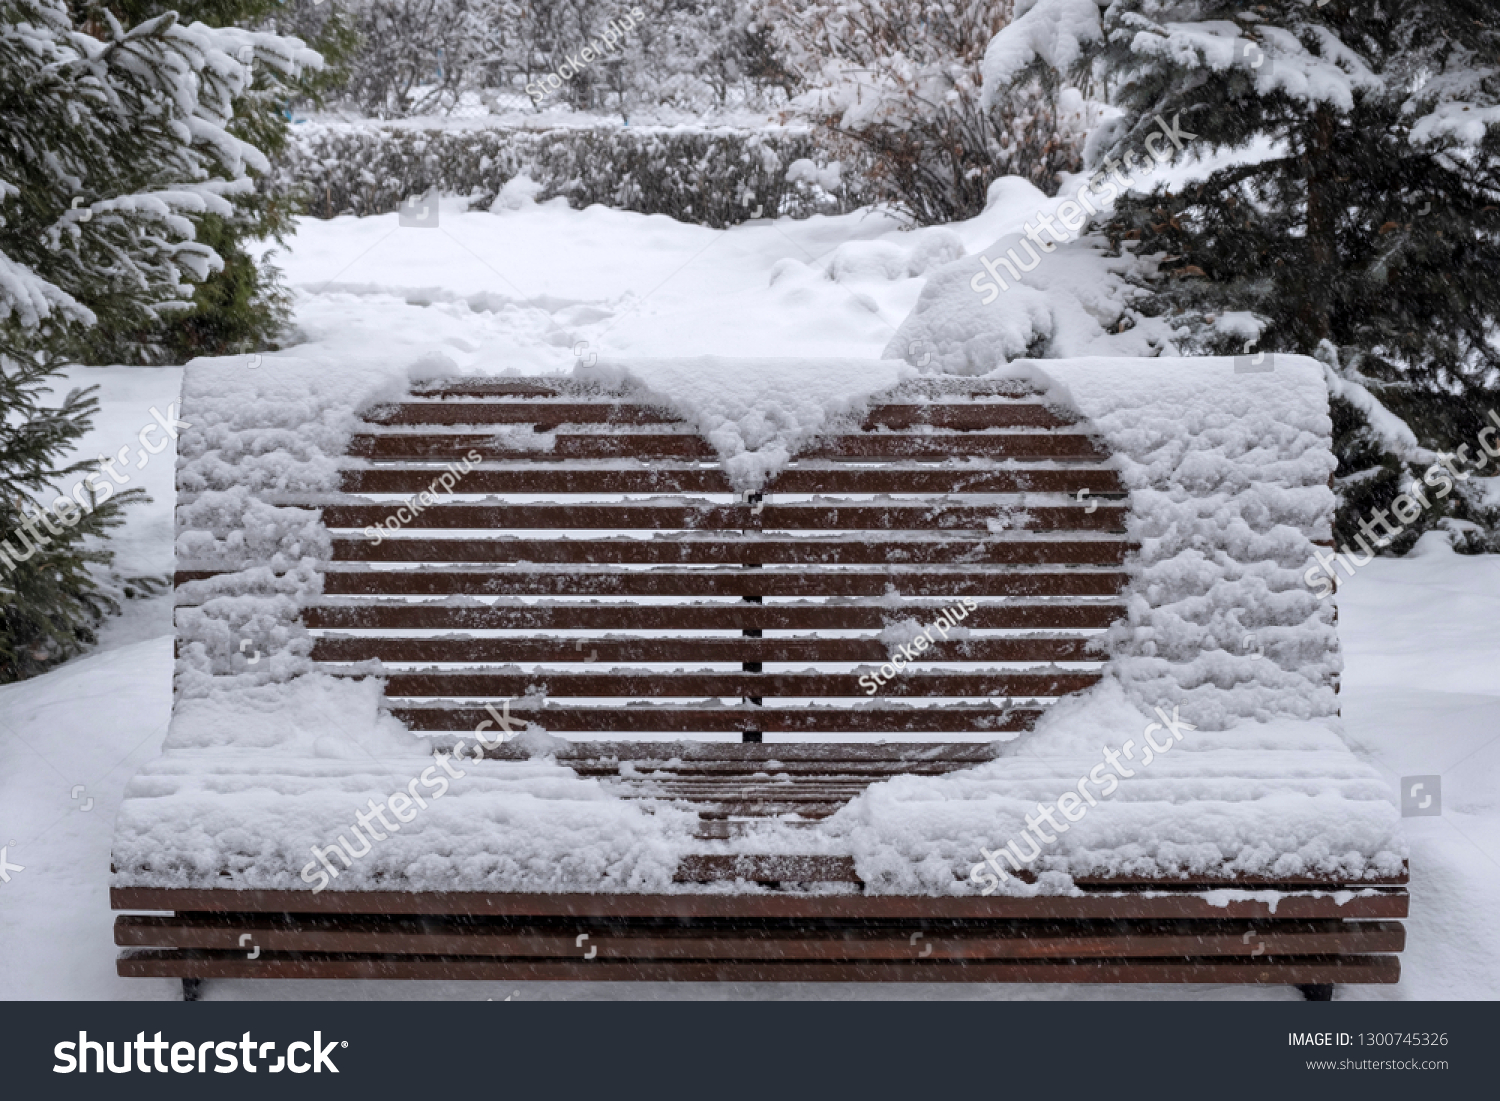 Wooden bench covered with snow and heart drawn on it. Heart drawn on snow on bench in park. Saint Valentine's day. #1300745326